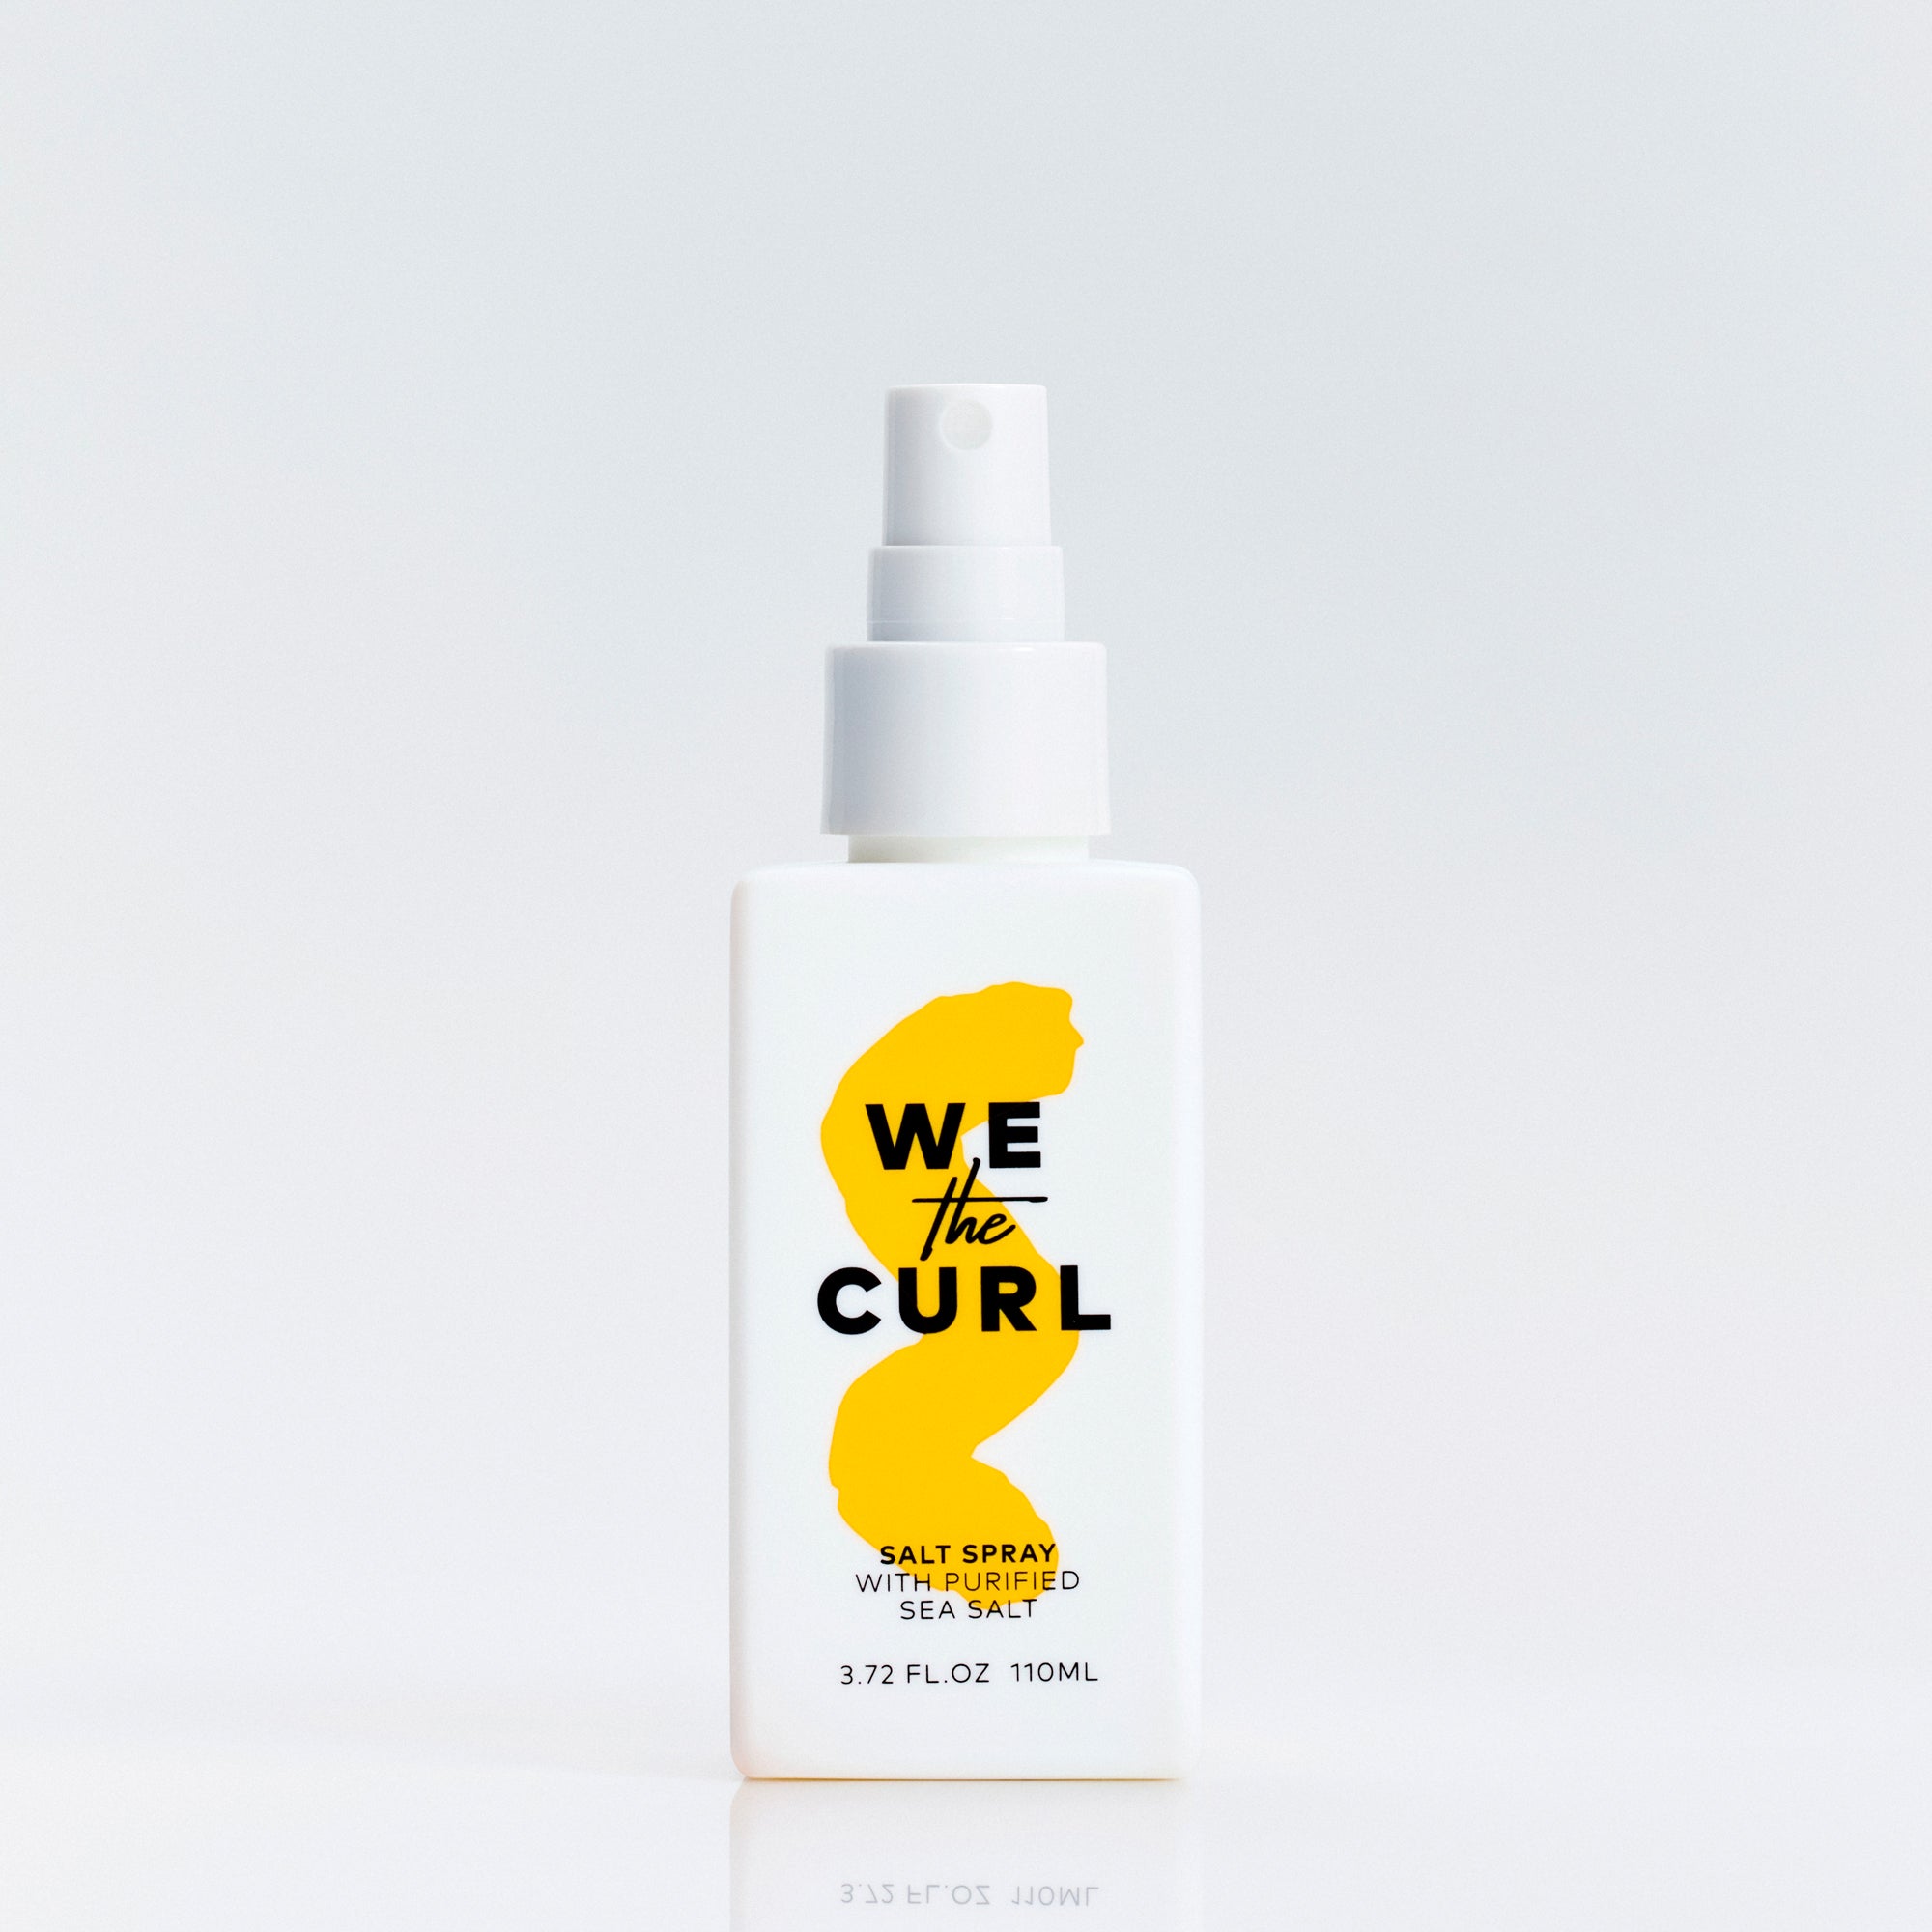 Salt Spray for Wavy, Curly and Coily Hair  We The Curl by Rose Bertram –  We the Curl